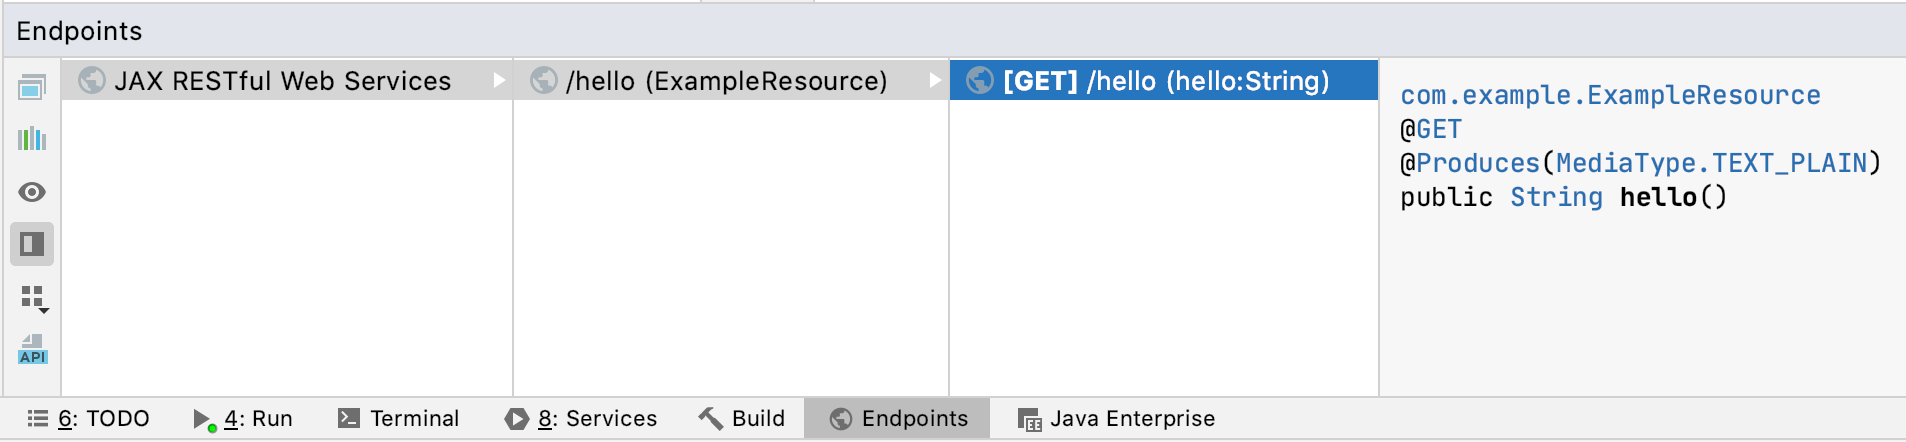 ExampleResource endpoint in the Endpoints tool window